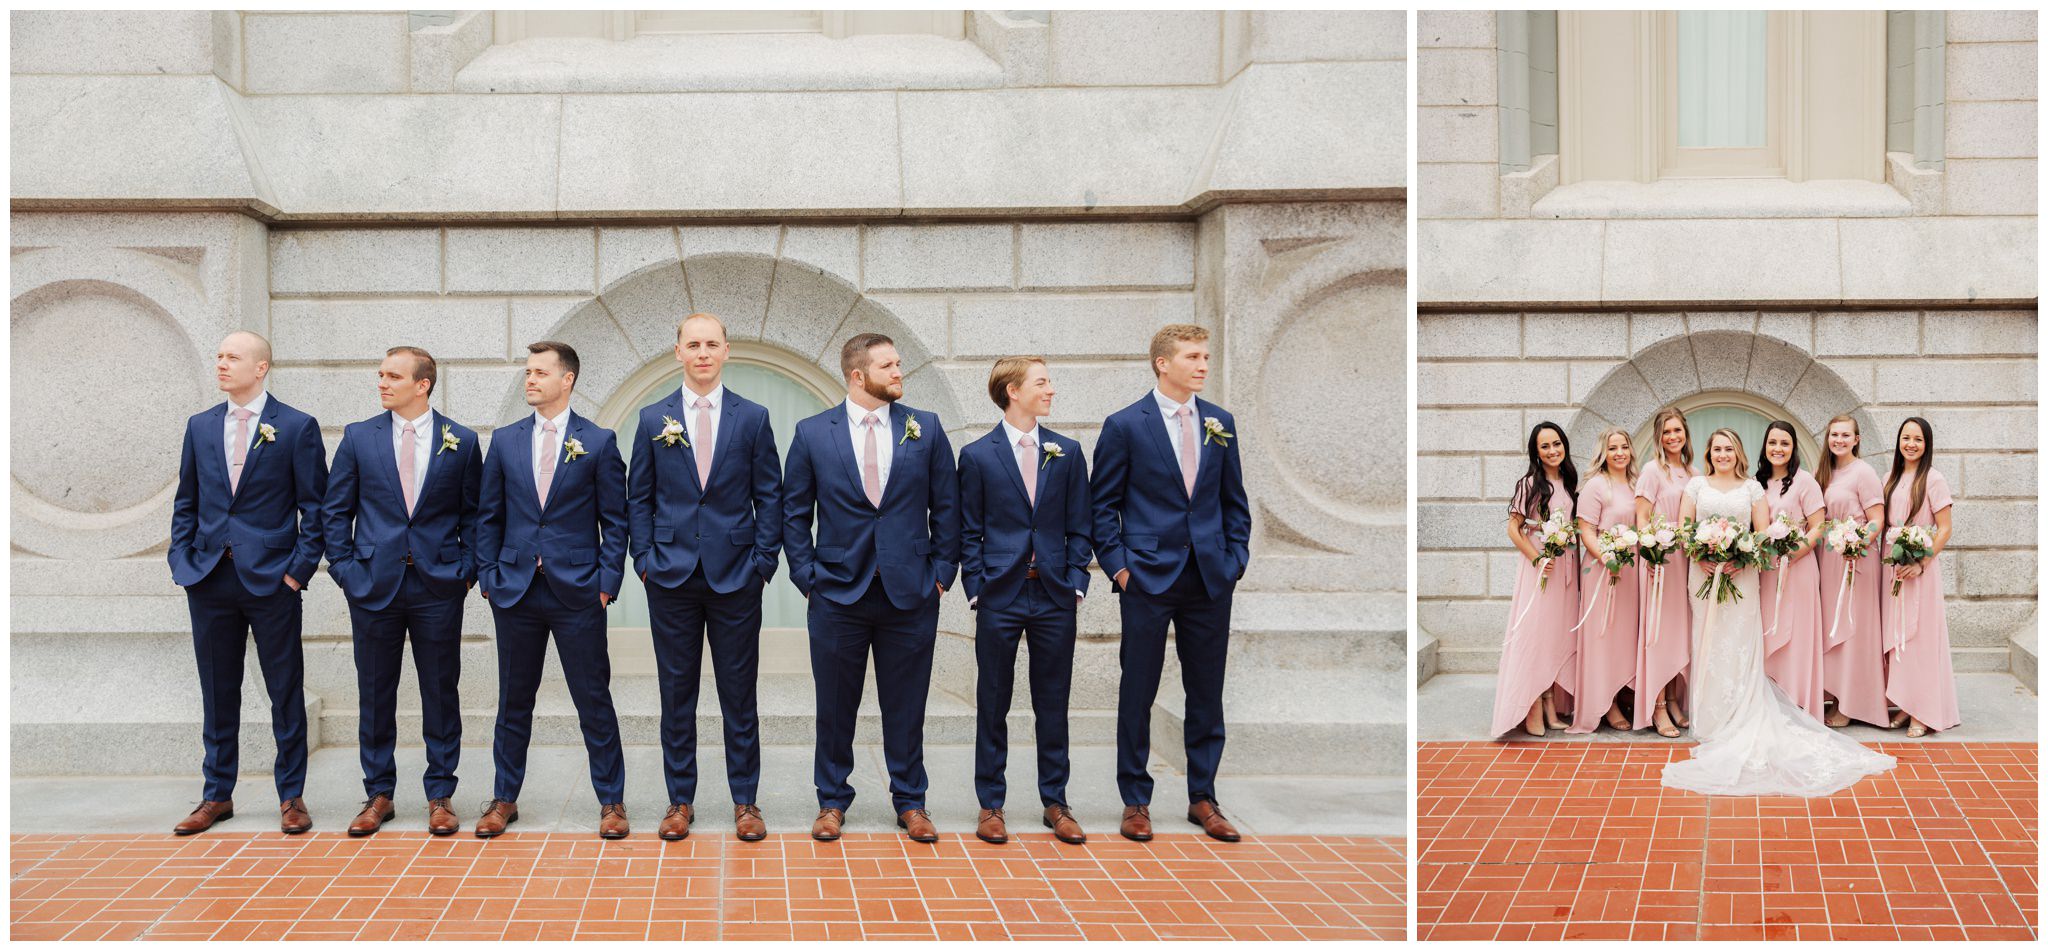 Wedding Party pictures at the SLC Temple